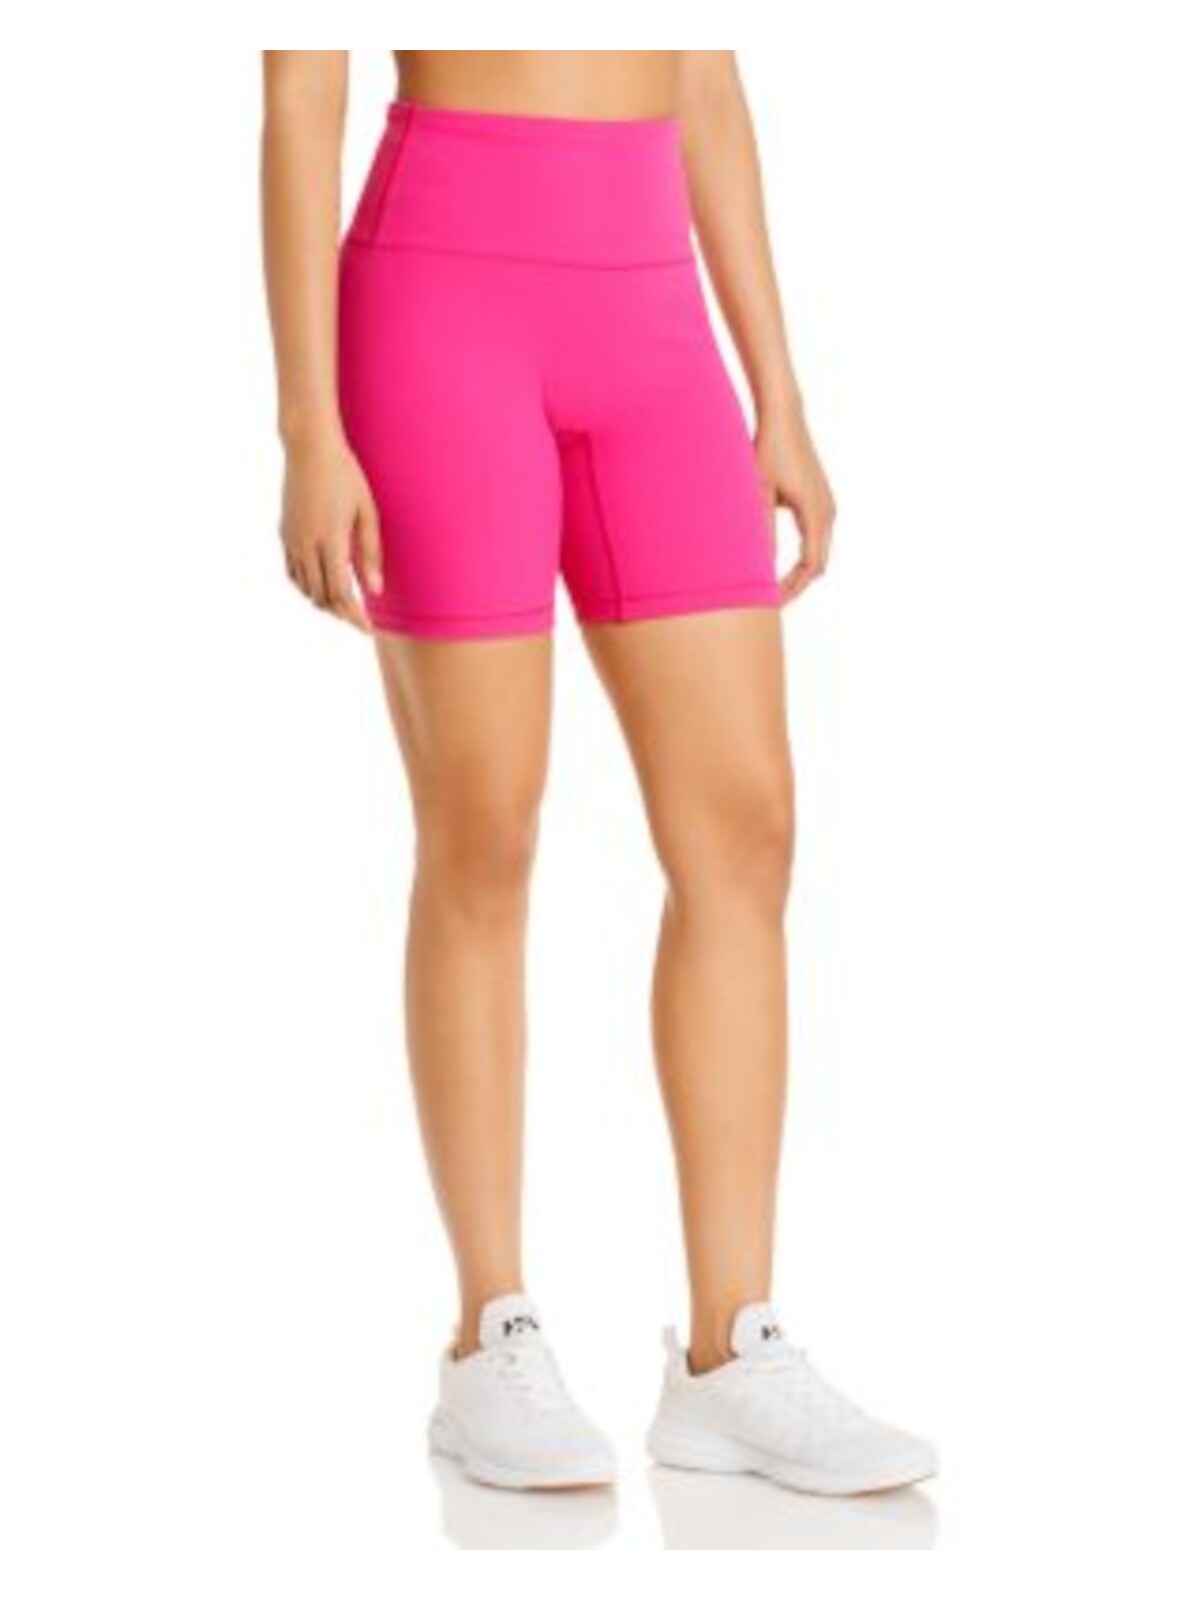 SOLID & STRIPED SPORT Womens Pink Stretch Ribbed Fitted Bike Active Wear High Waist Shorts S